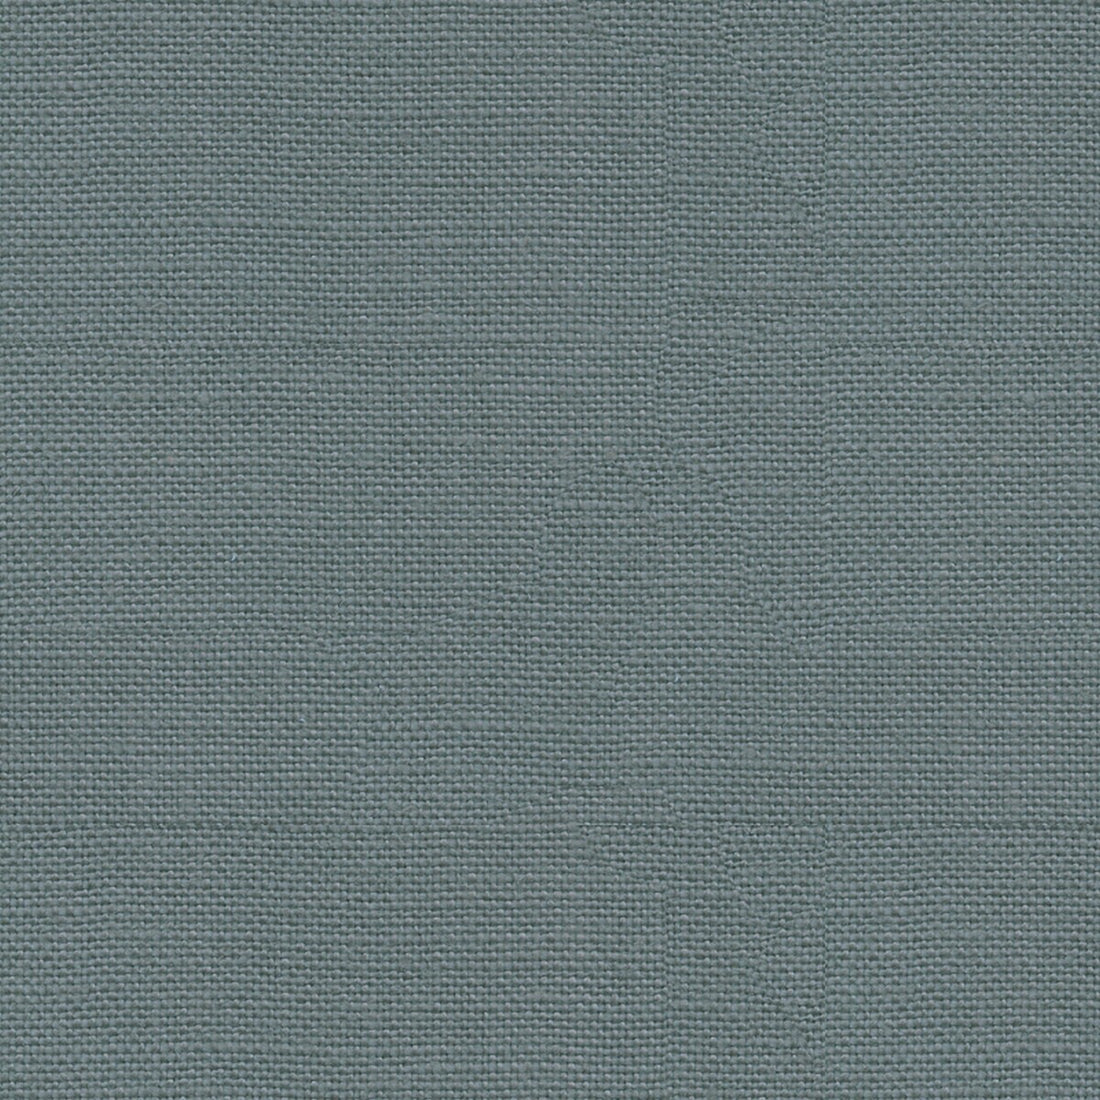 Weekend Linen fabric in marine blue color - pattern FD698.H103.0 - by Mulberry in the Crayford collection